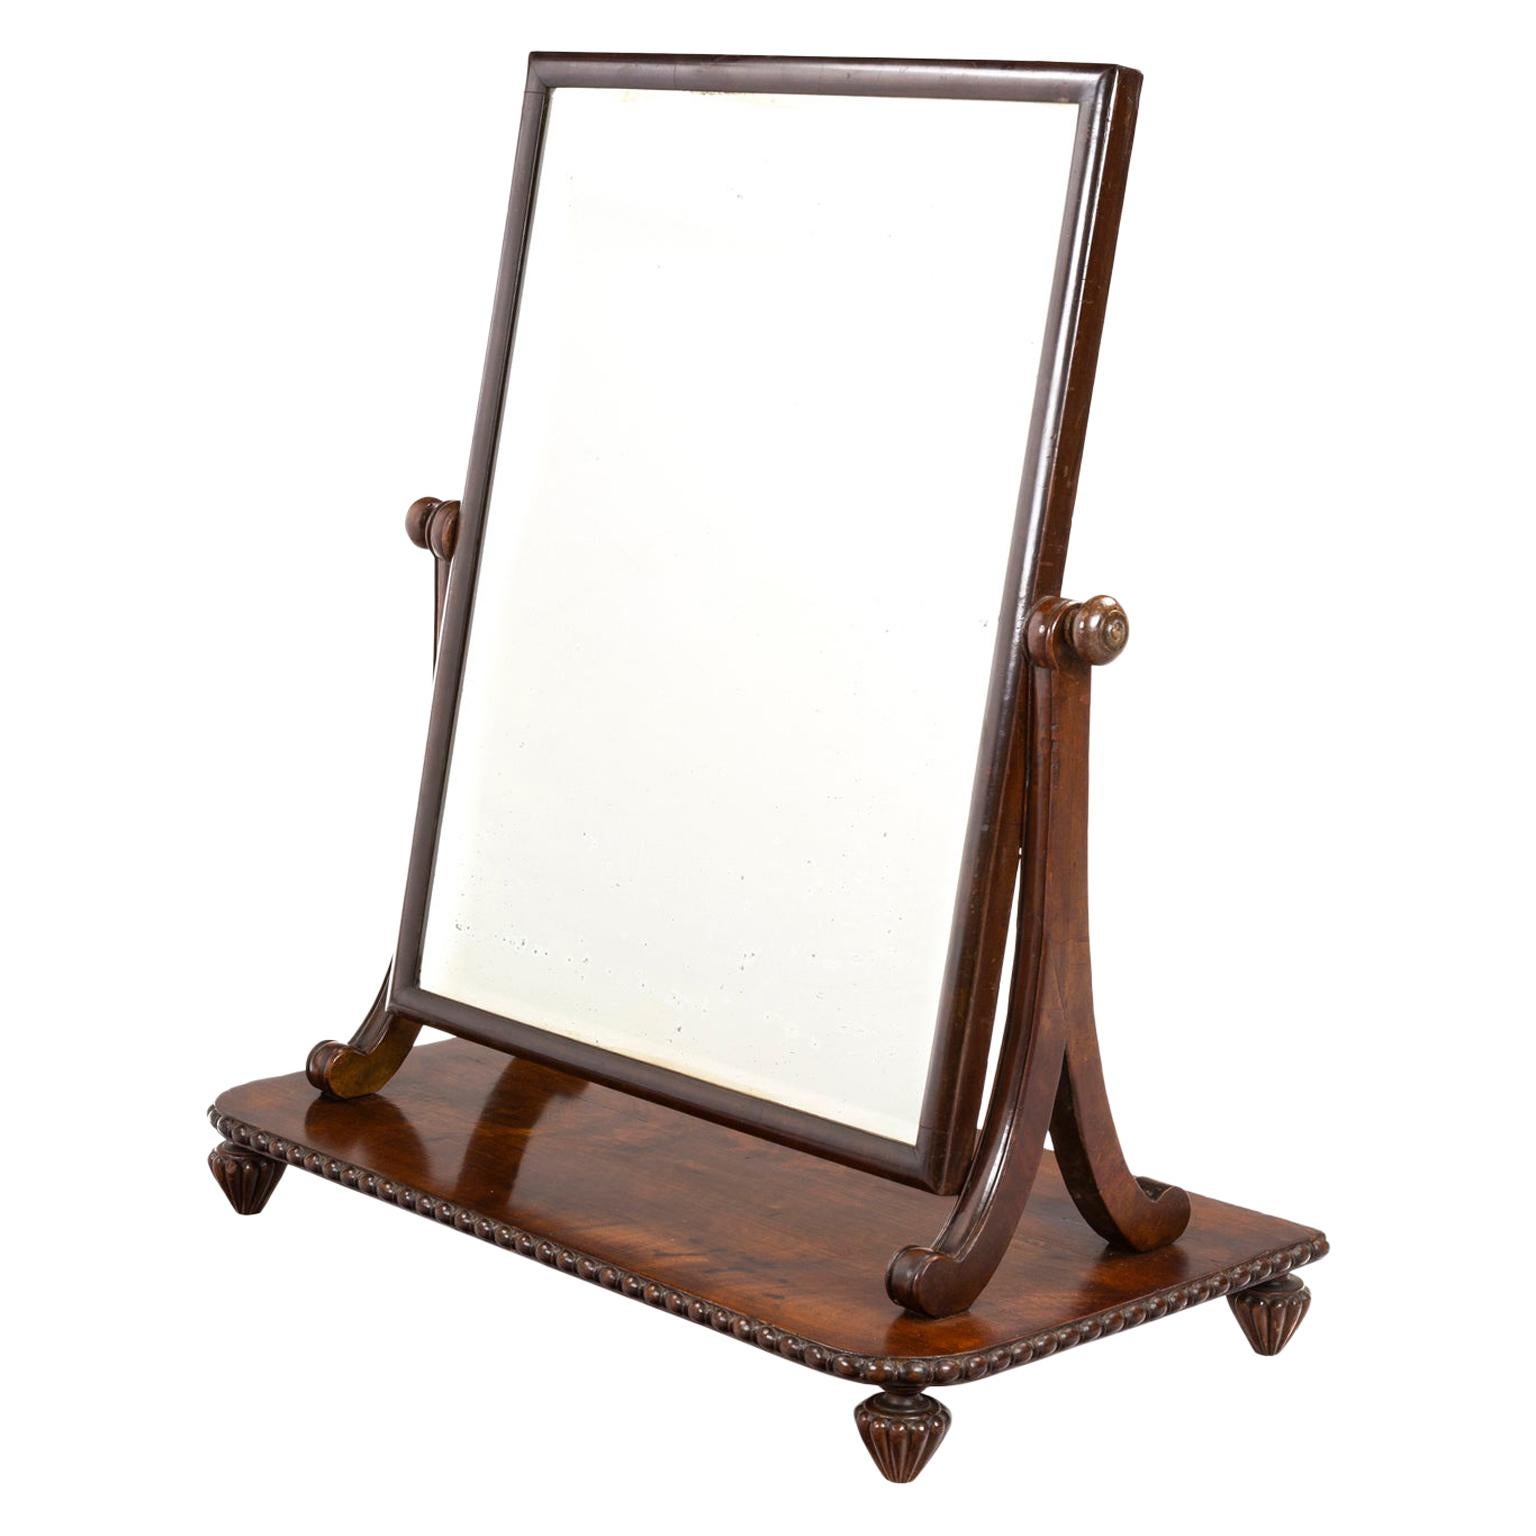 Gillows Dressing Mirror from the Regency Period